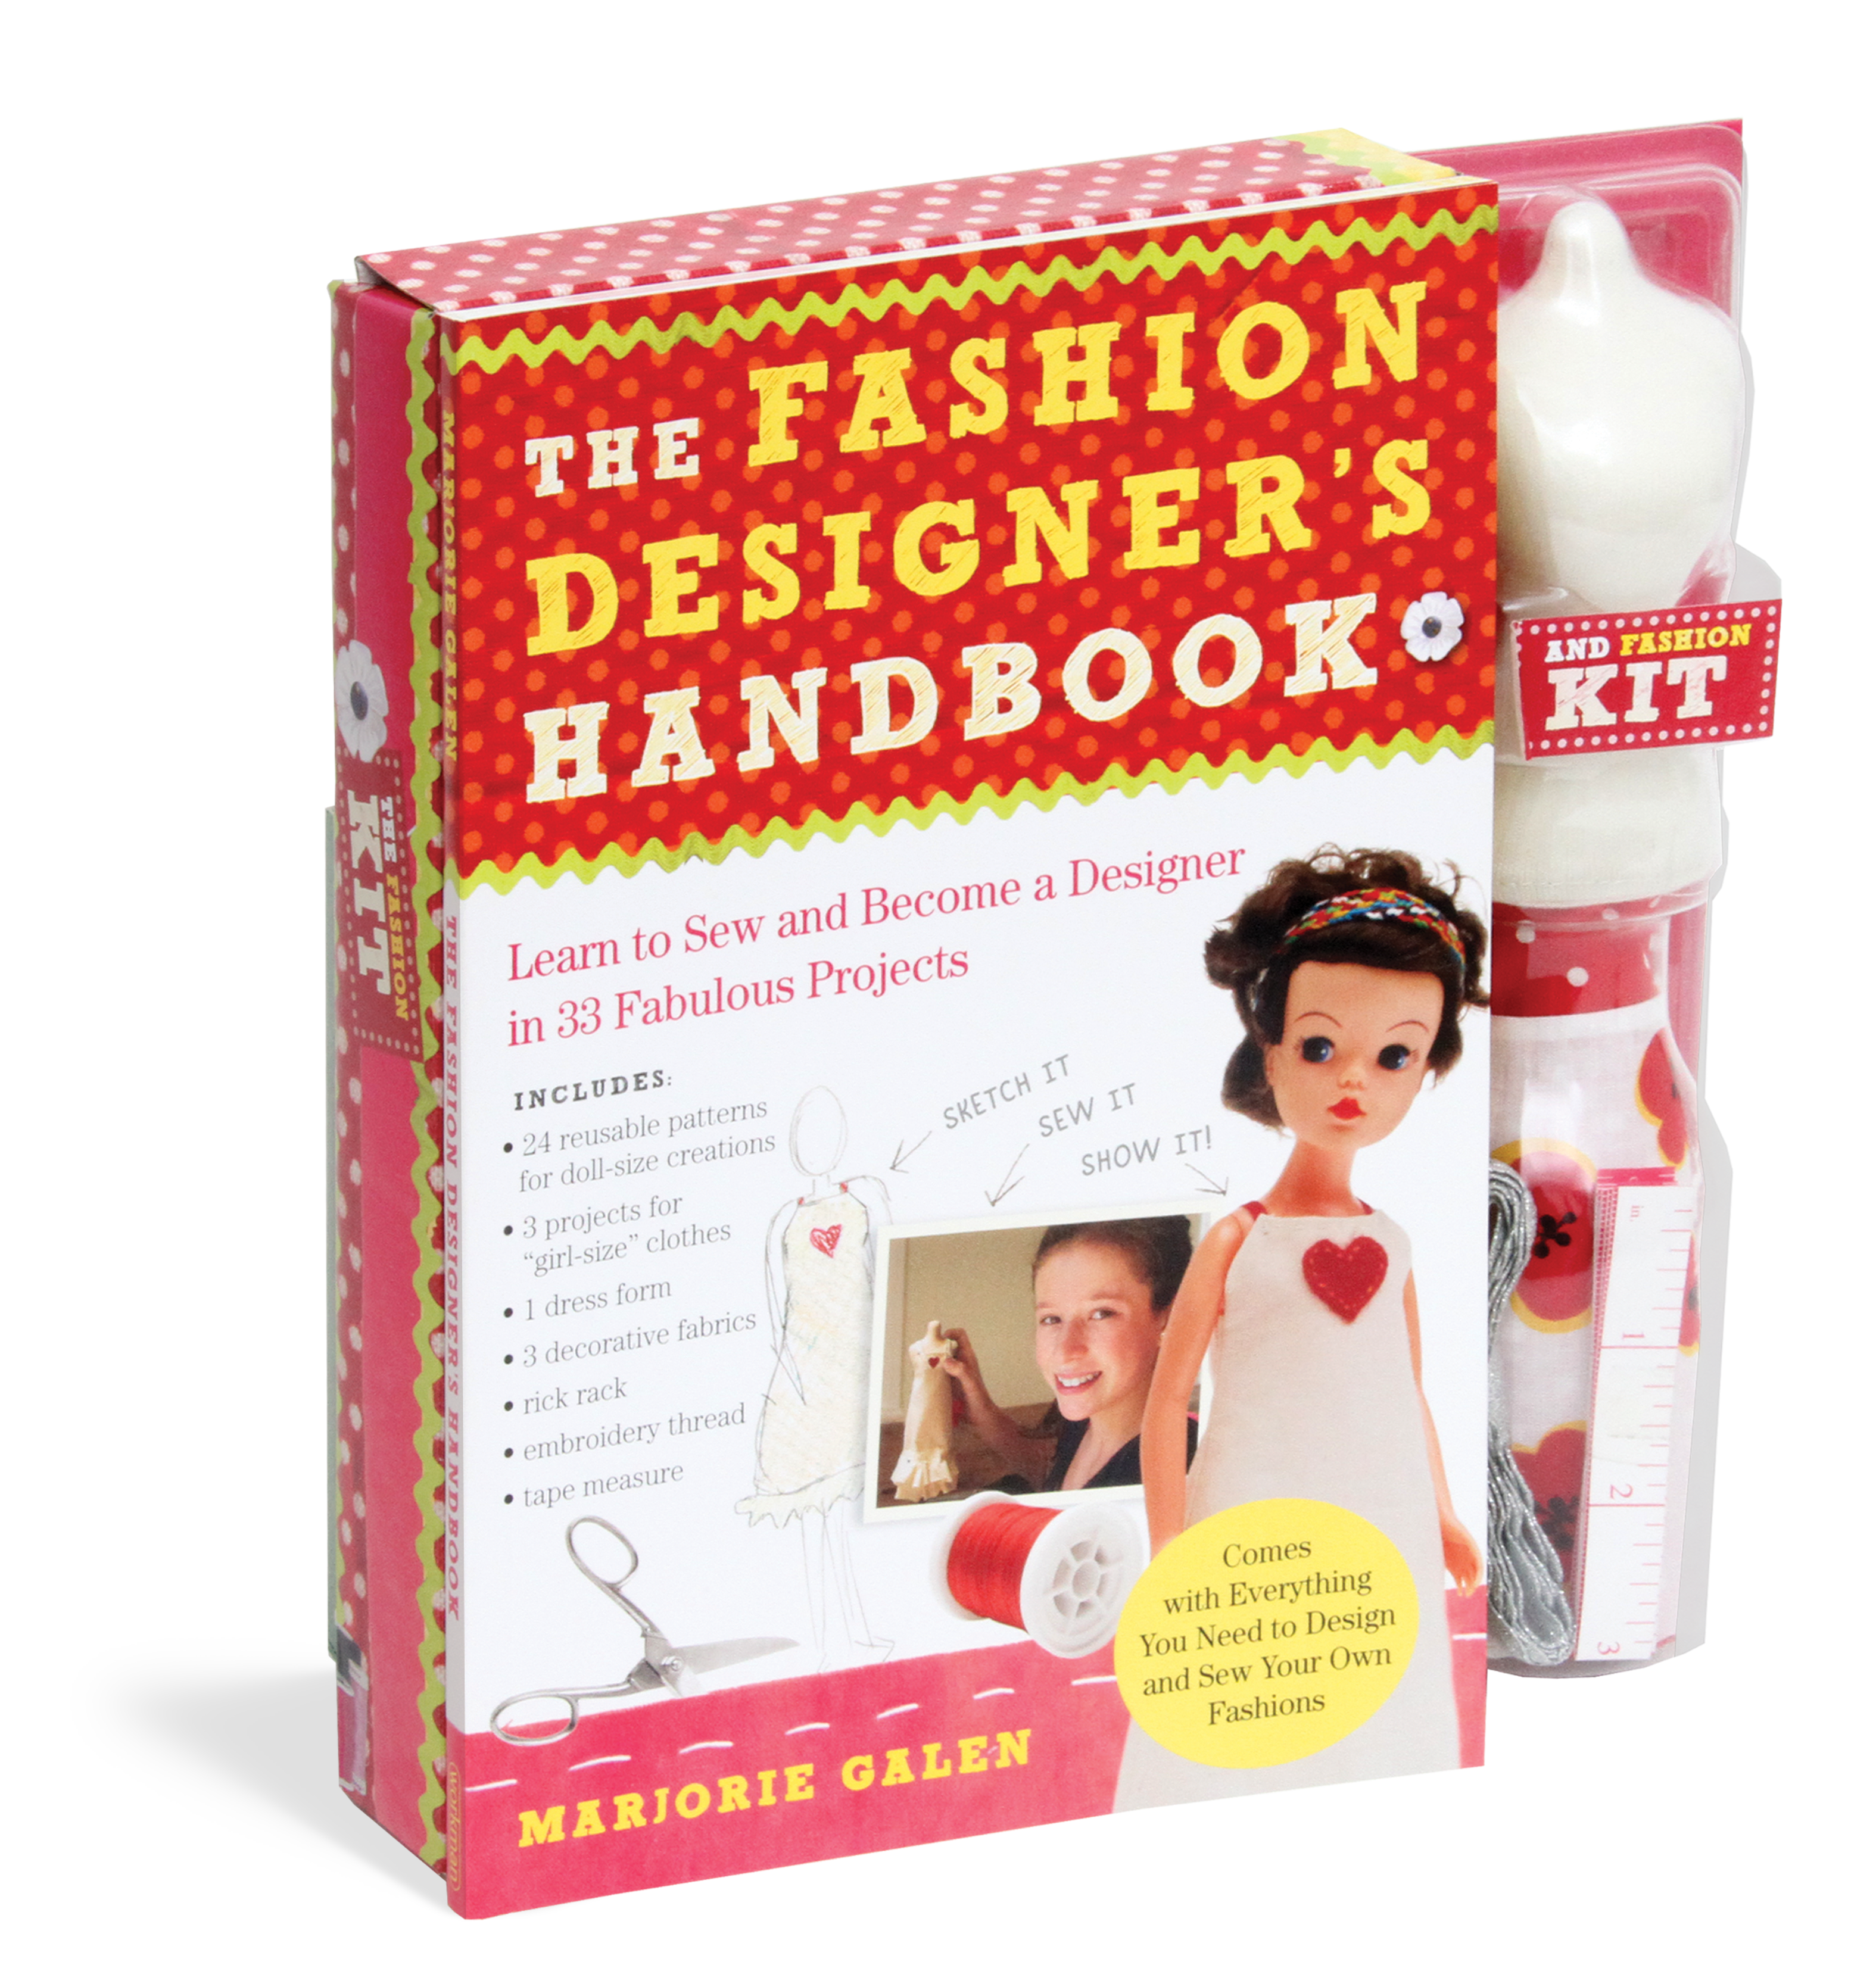 The-Fashion-Designers-Handbook--Fashion-Kit-Learn-to-Sew-and-Become-a-Designer-in-33-Fabulous-Projects